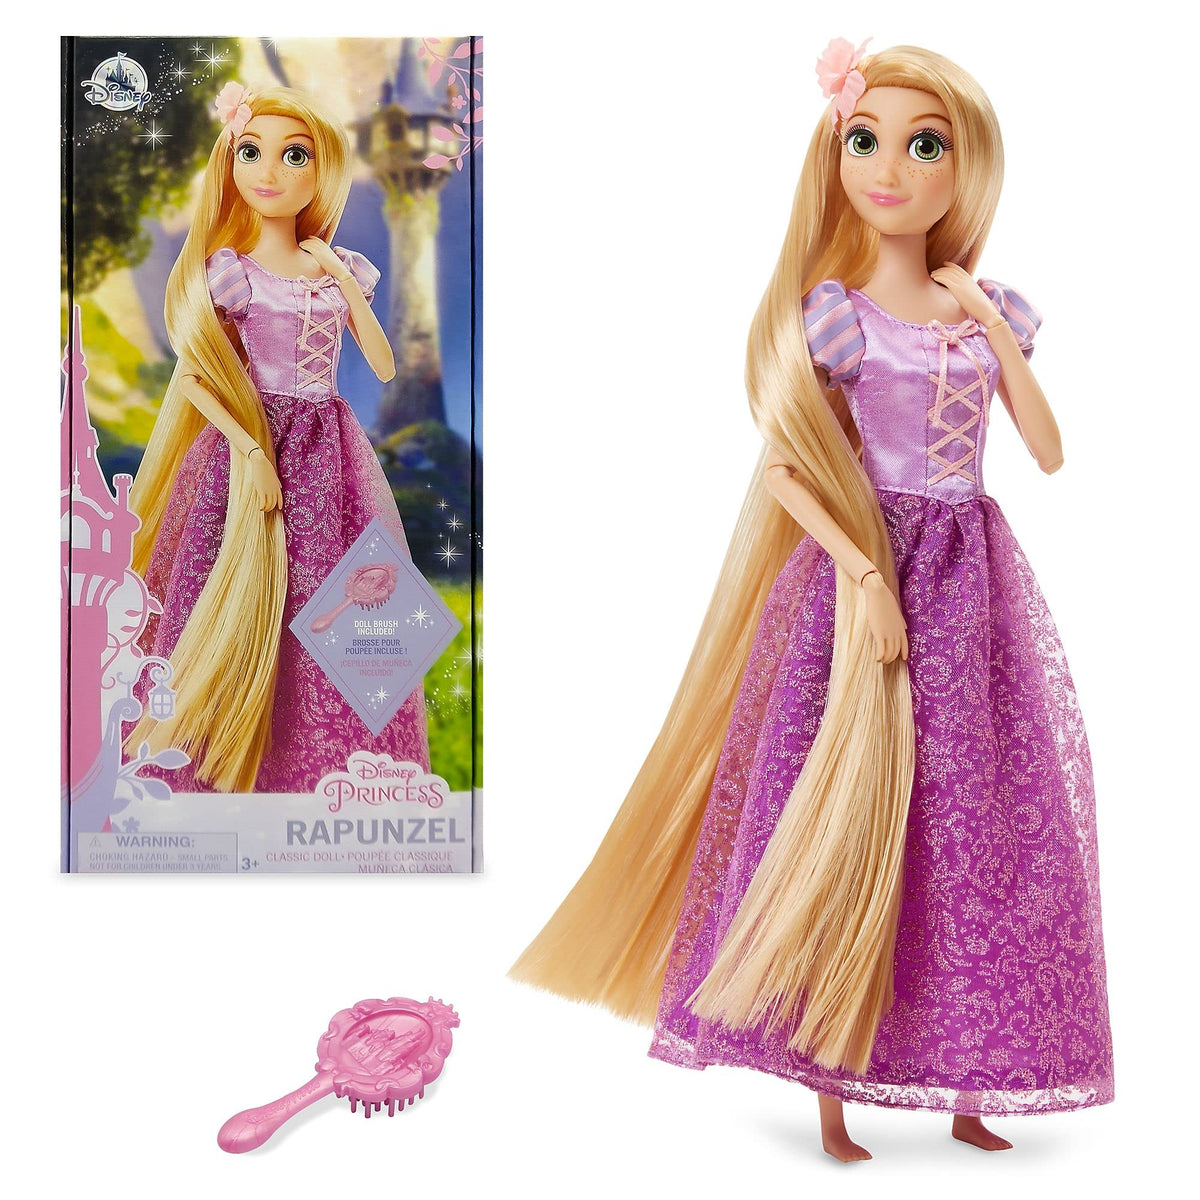 Disney Store Official Rapunzel Classic Doll for Kids, Tangled, 29cm/11â€, Includes Brush with Moulded Details, Fully Poseable Toy in Glittering Gown - Suitable for Ages 3+